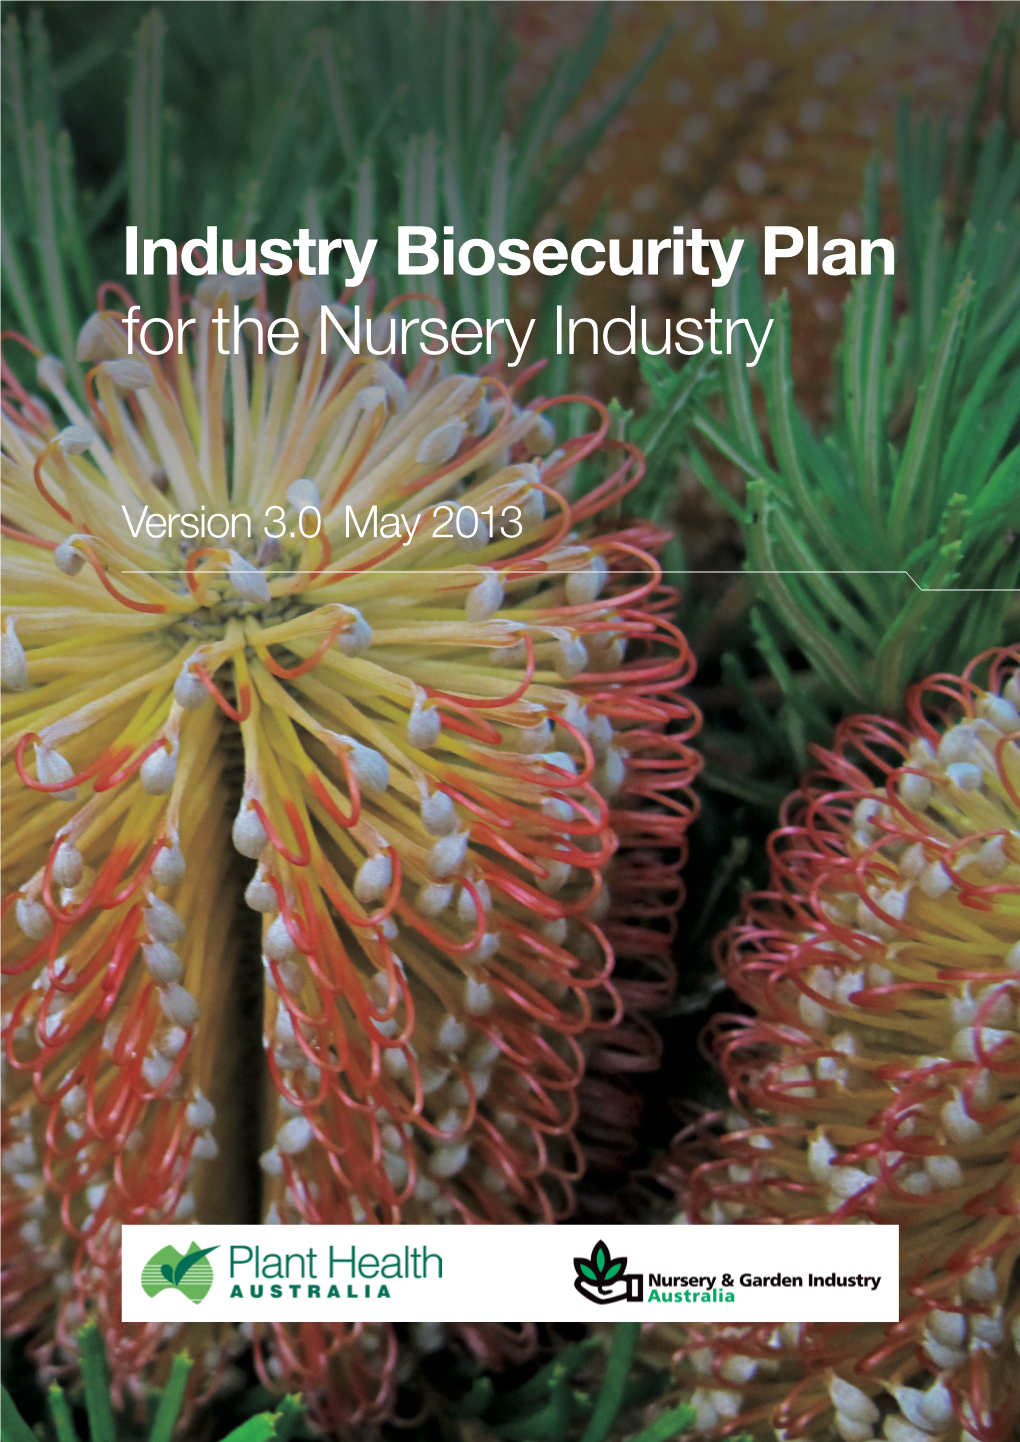 Industry Biosecurity Plan for the Nursery Industry